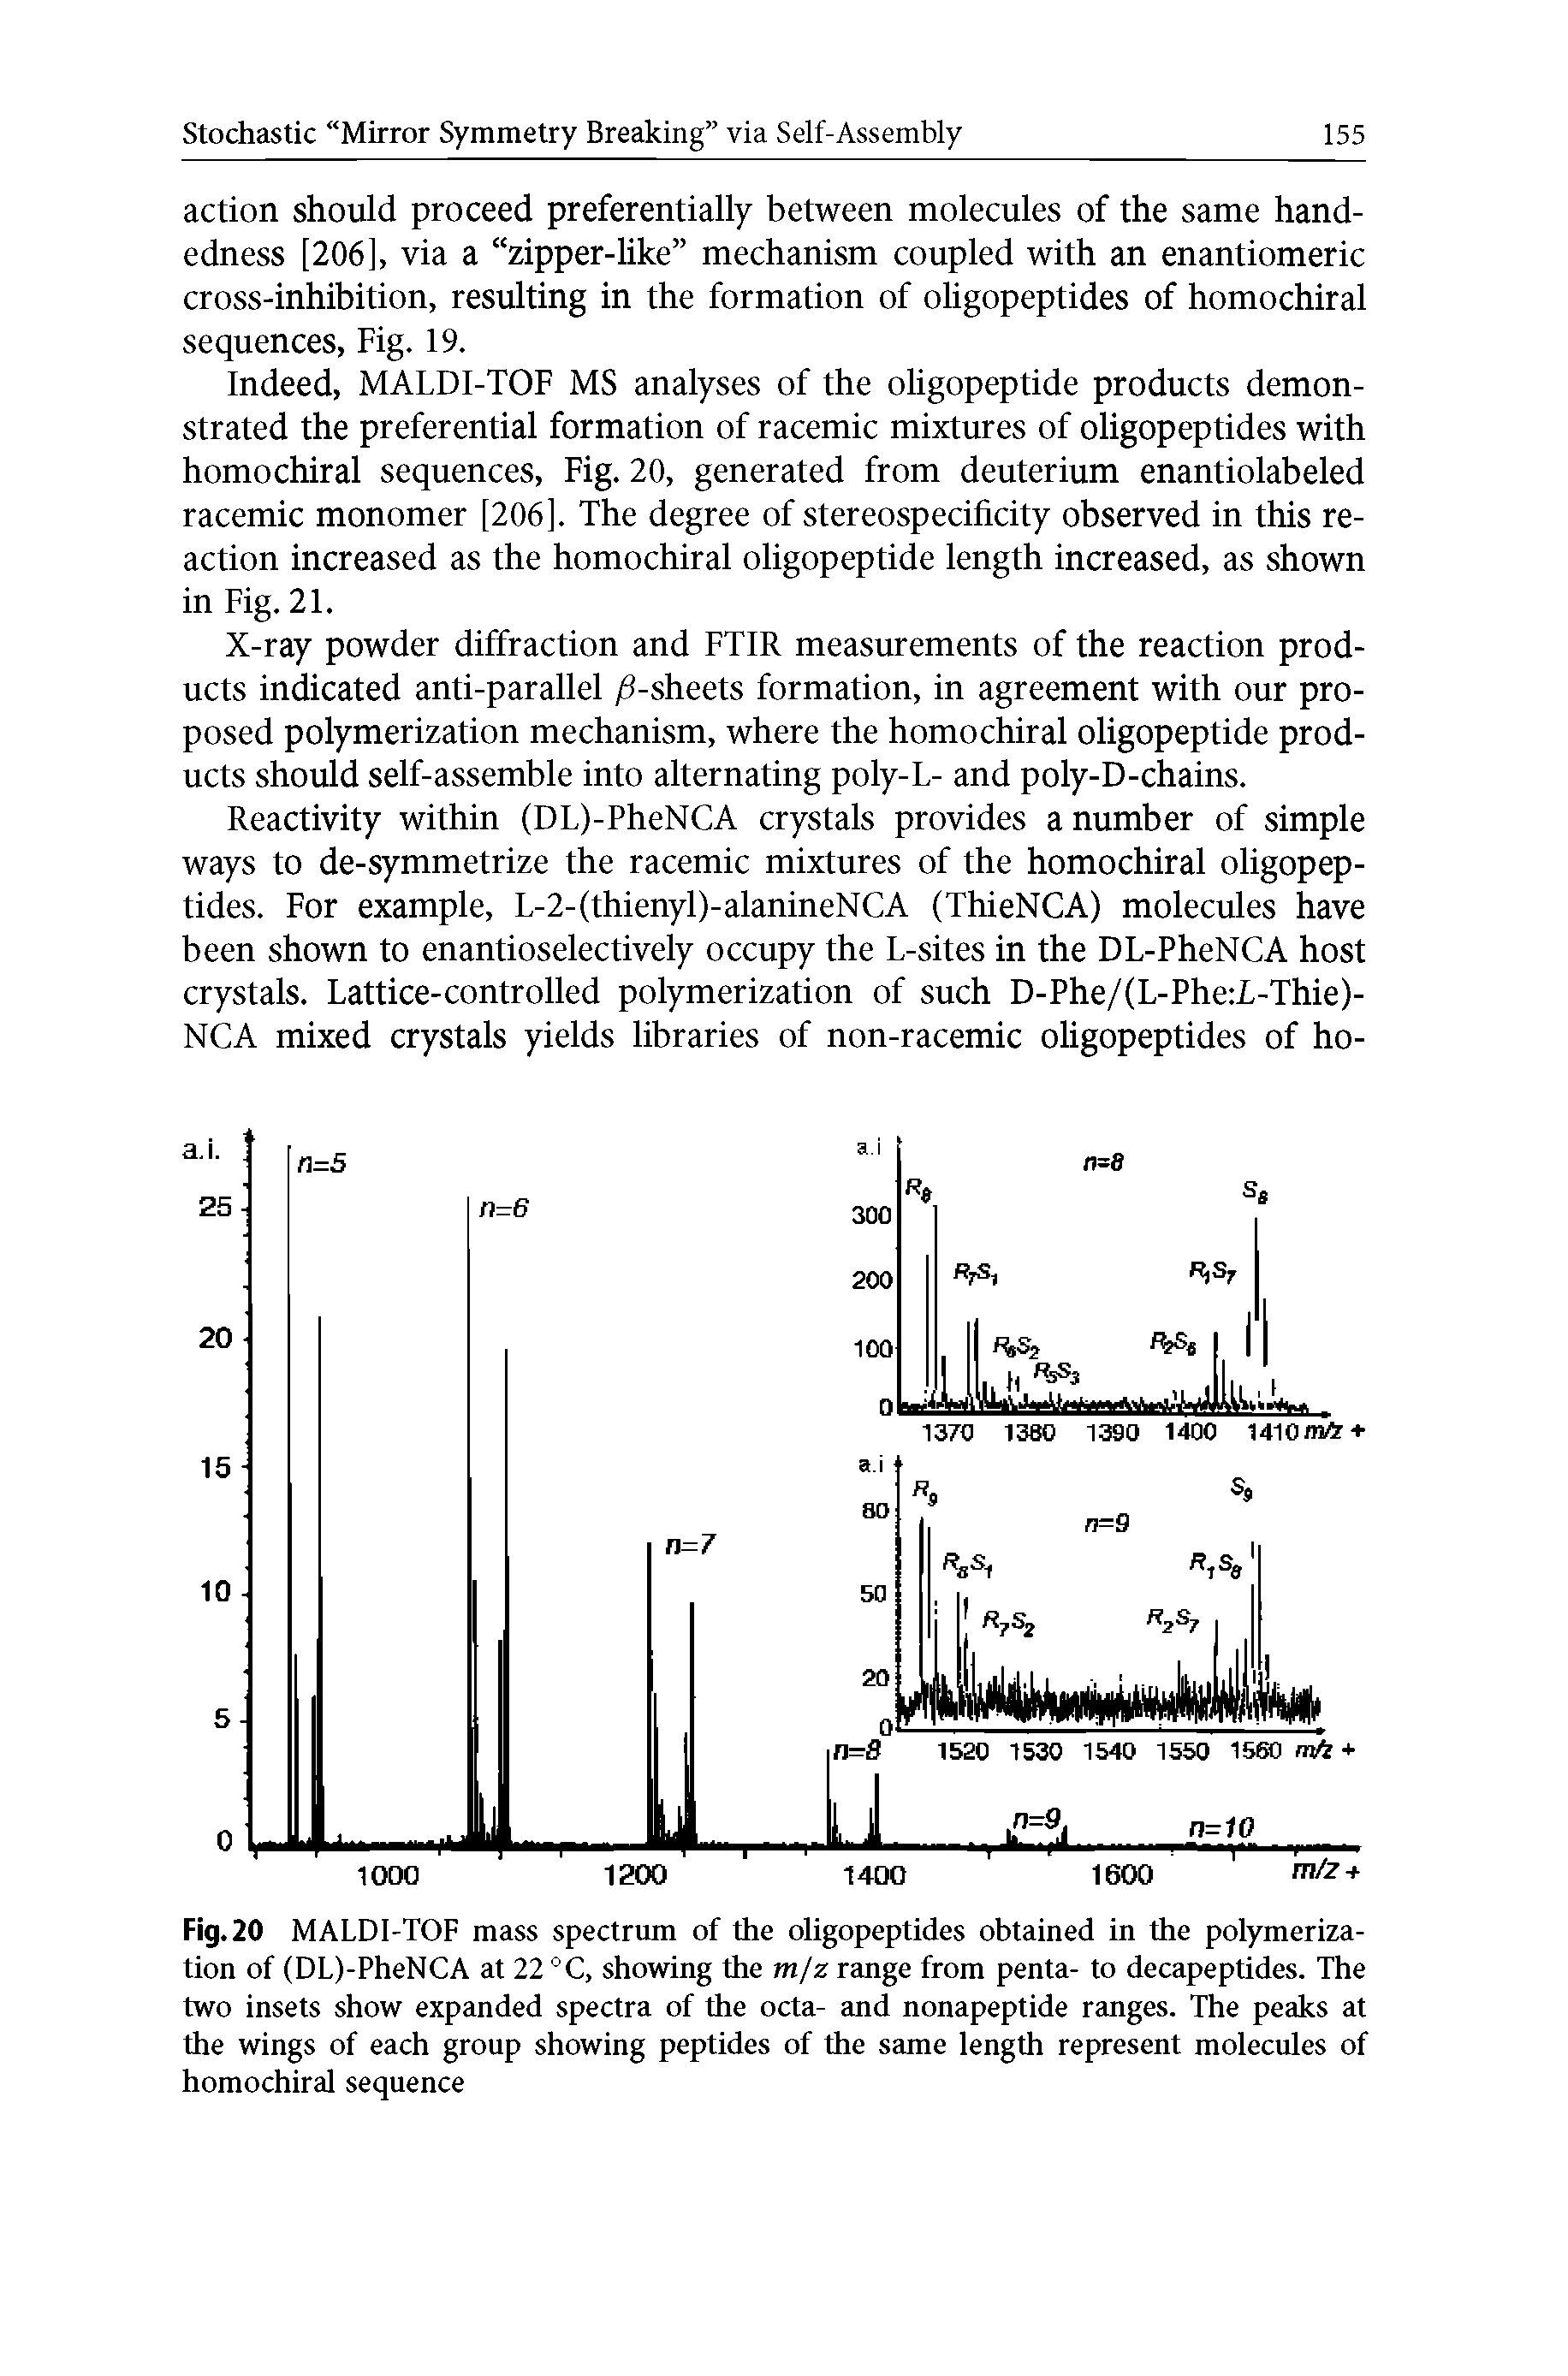 Fig.20 MALDI-TOF mass spectrum of the oligopeptides obtained in the polymerization of (DL)-PheNCA at 22 °C, showing the m/z range from penta- to decapeptides. The two insets show expanded spectra of the octa- and nonapeptide ranges. The peaks at the wings of each group showing peptides of the same length represent molecules of homochiral sequence...